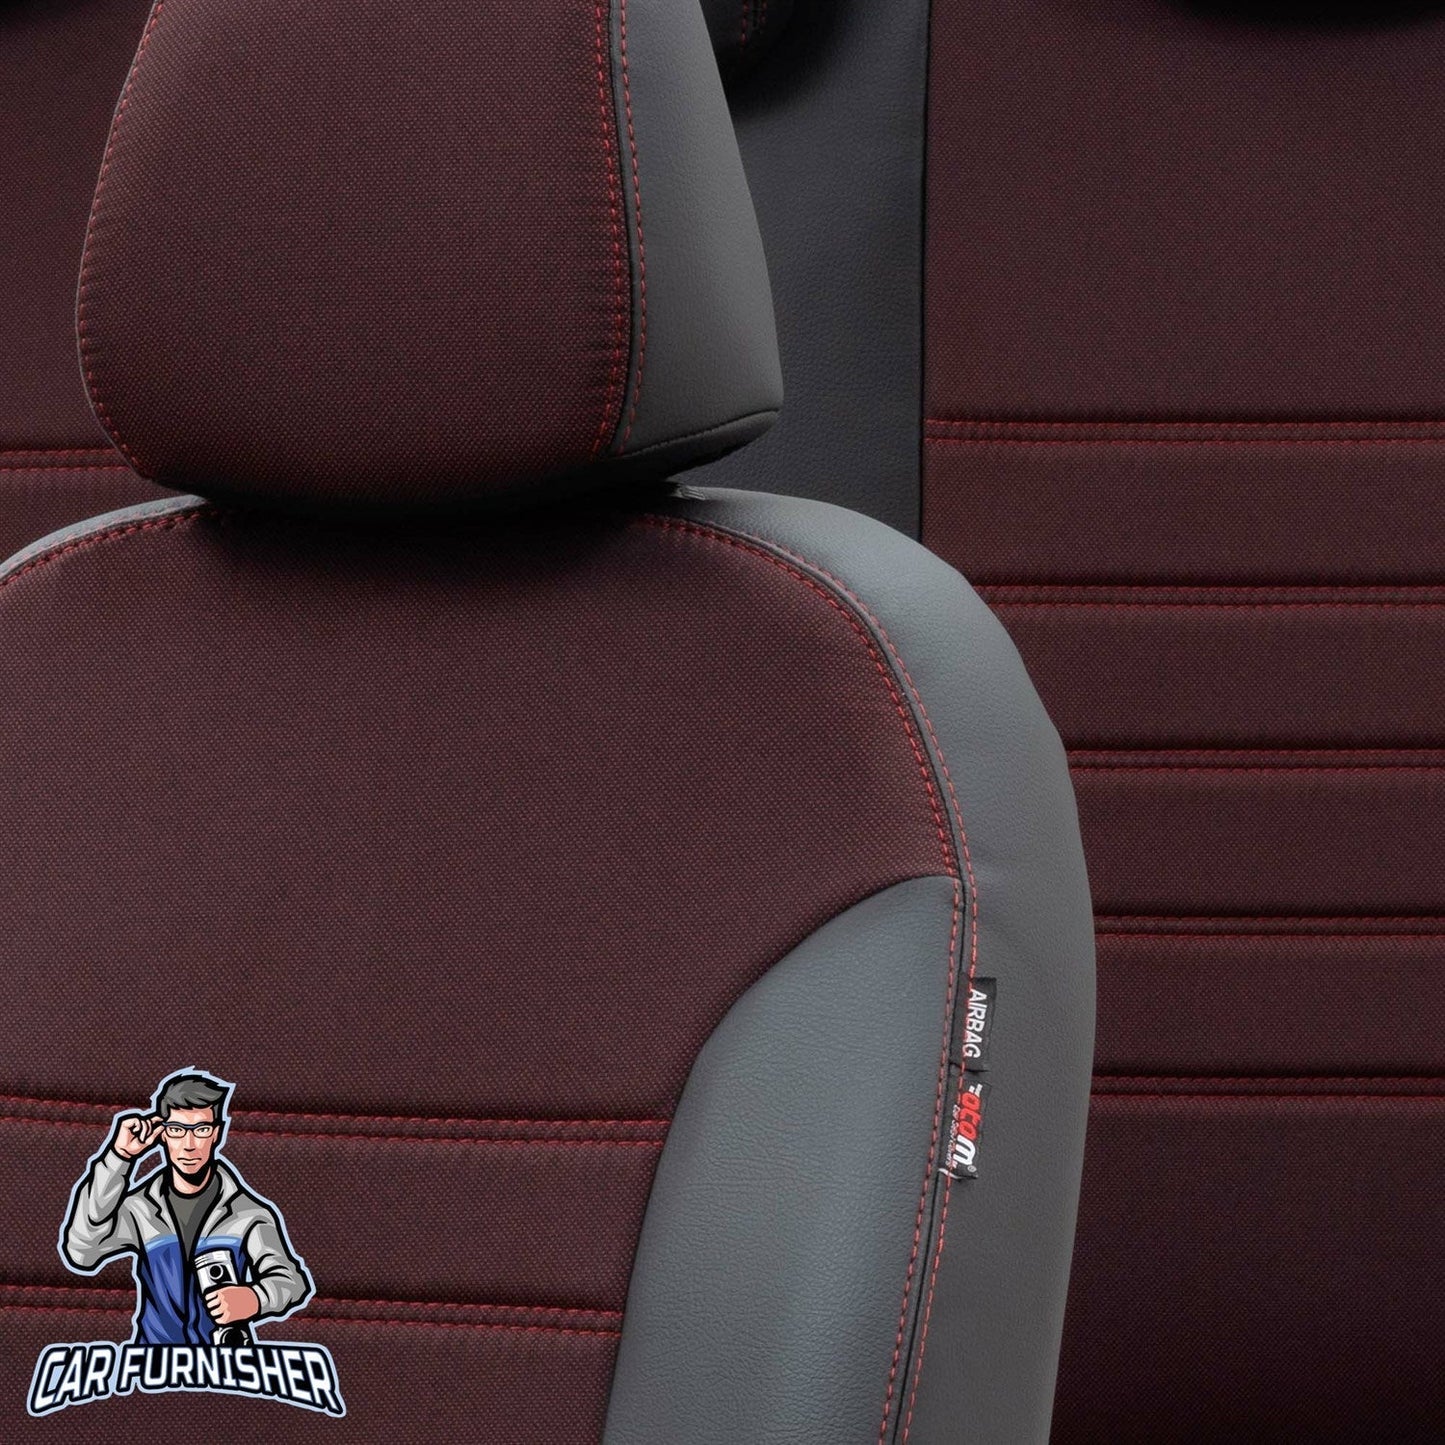 Bmw 5 Series Seat Cover Paris Leather & Jacquard Design Red Leather & Jacquard Fabric